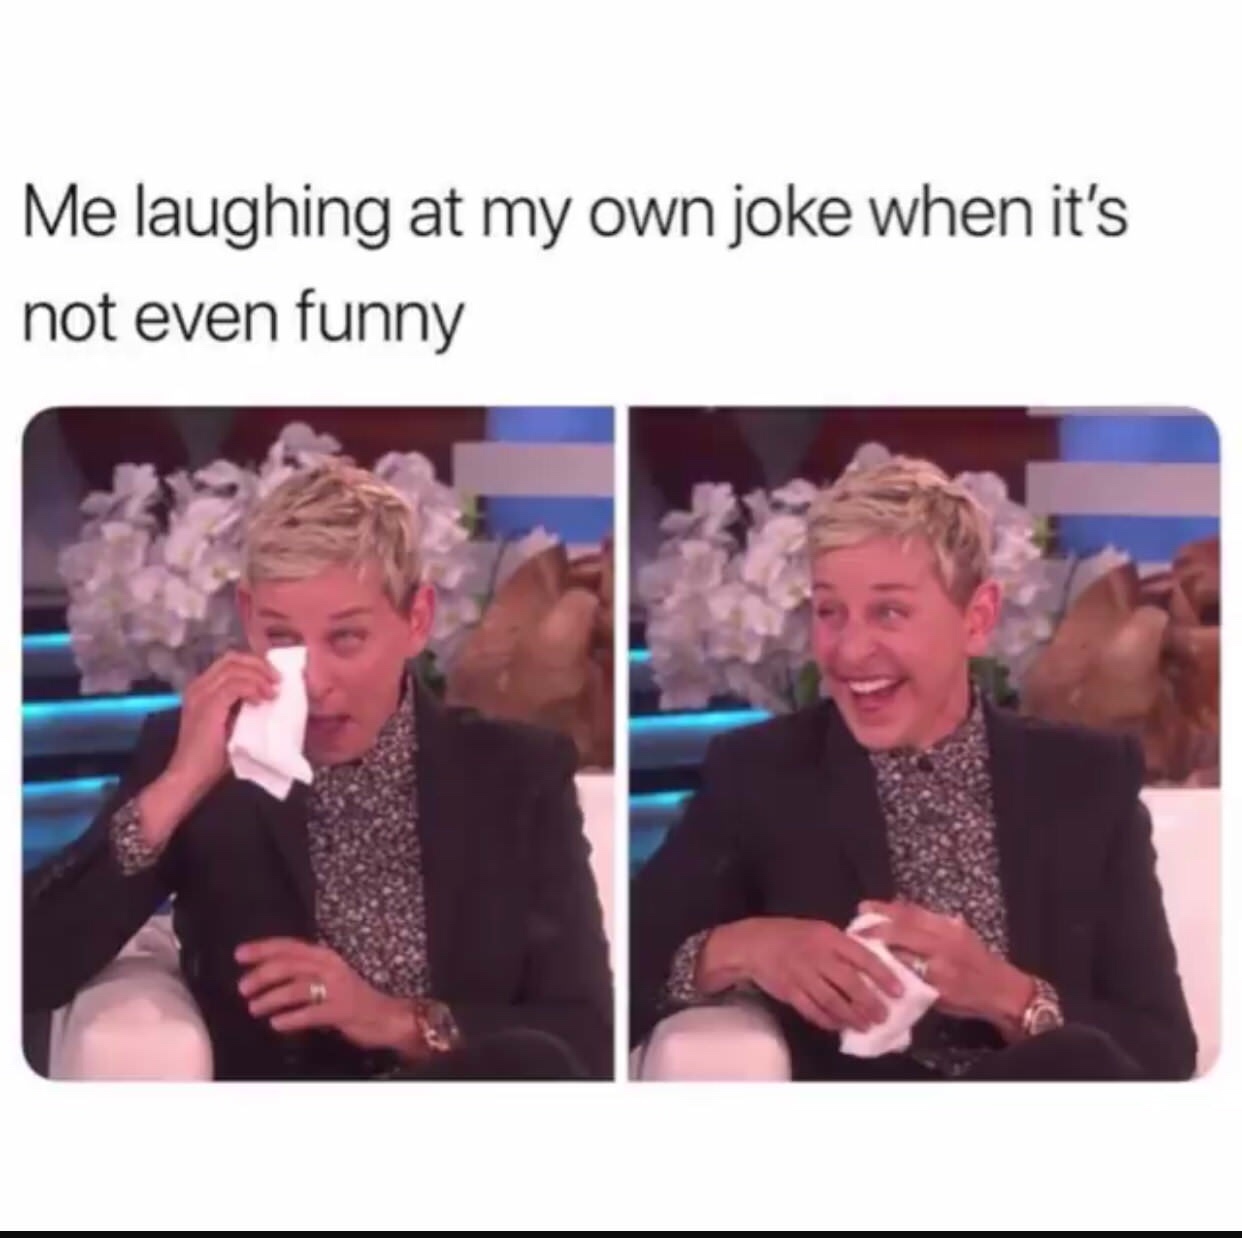 memes about laughing at your own jokes - Me laughing at my own joke when it's not even funny